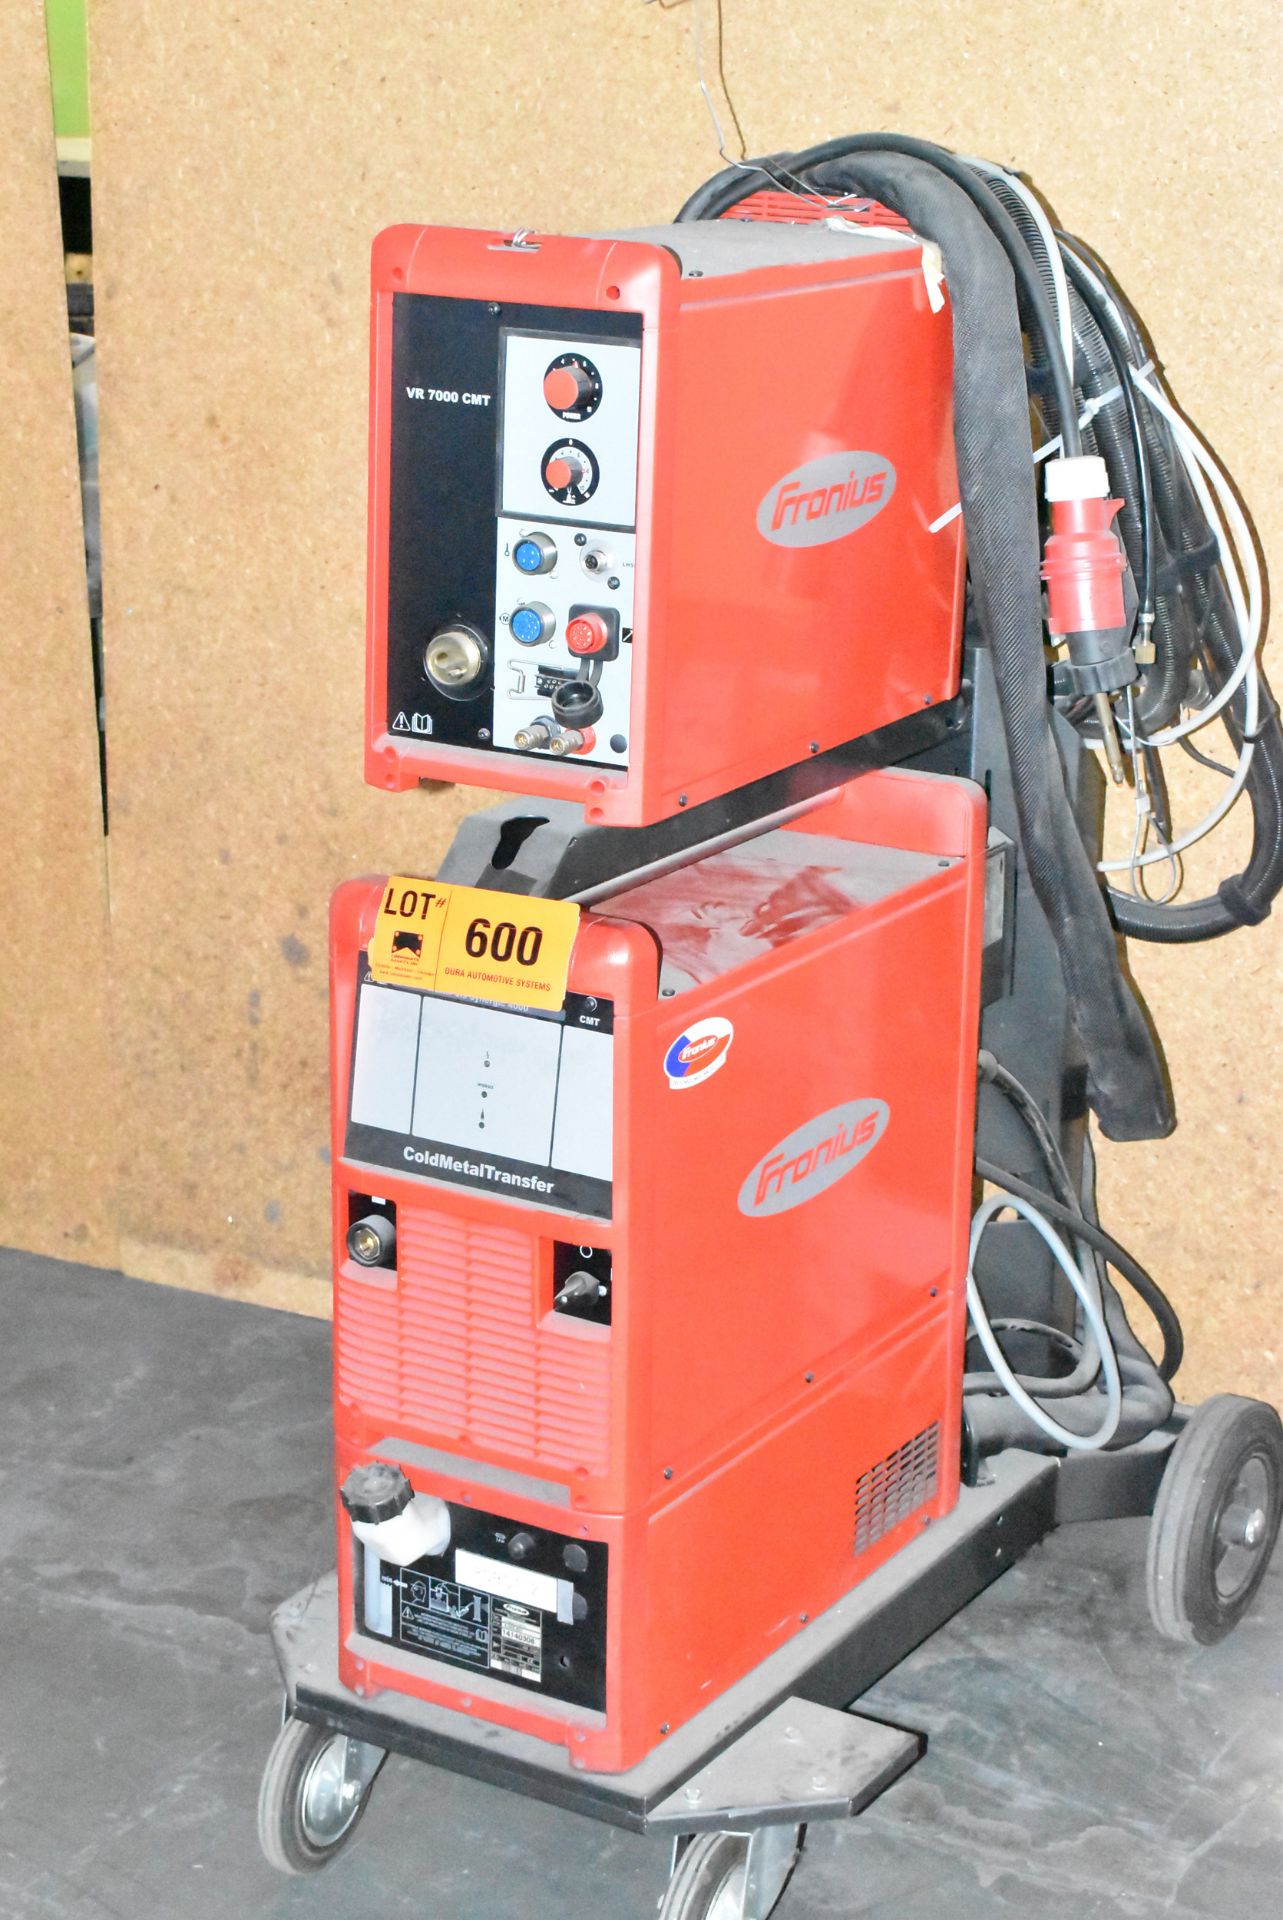 FRONIUS TRANSPLUS SYNERGIC 4000 CMT MIG WELDER WITH WIRE FEEDER CABLES AND GUN, S/N 16160071 (BAU